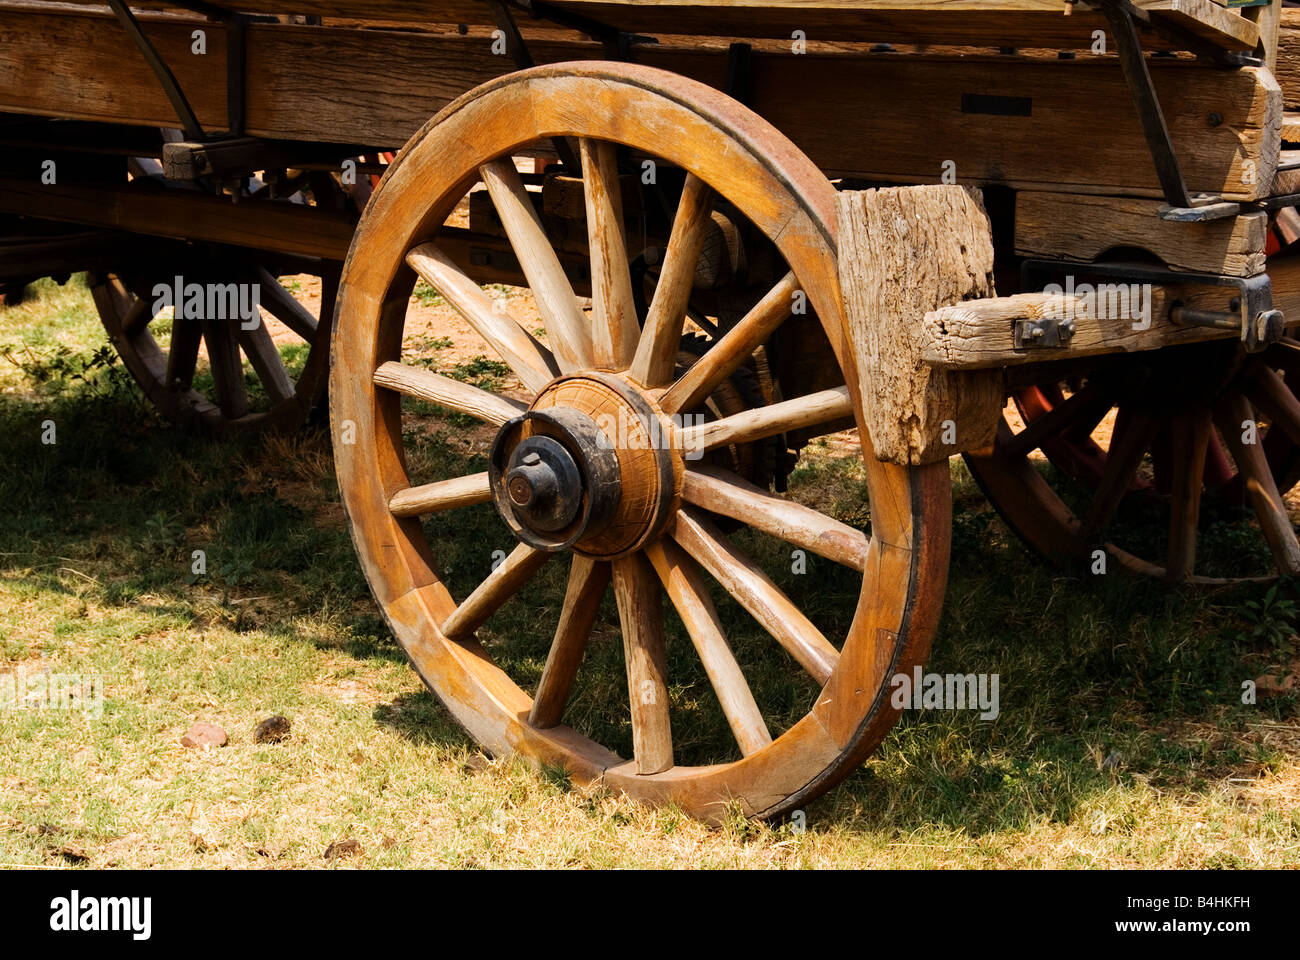 Close up of an old wooden wagon wheel Stock Photo